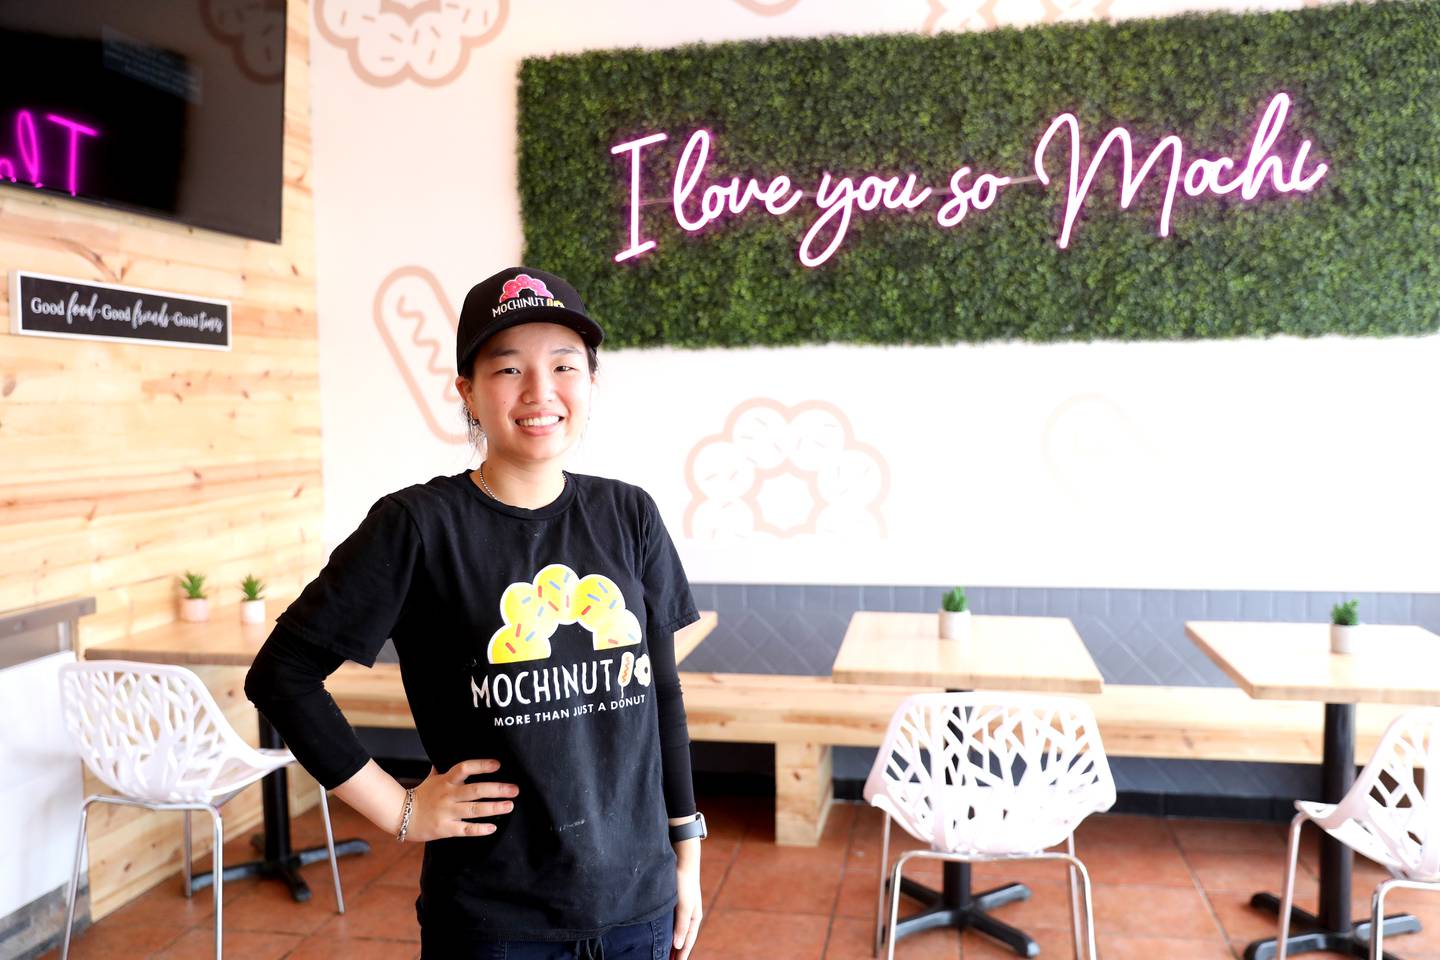 Melanie Chen is the general manager of Mochinut, which recently opened at 2704 E. Main St. in the Foxfield Commons shopping center in St. Charles. A mochi donut is a donut that originated from Hawaii and is a combination of American doughnuts and Japanese mochi.